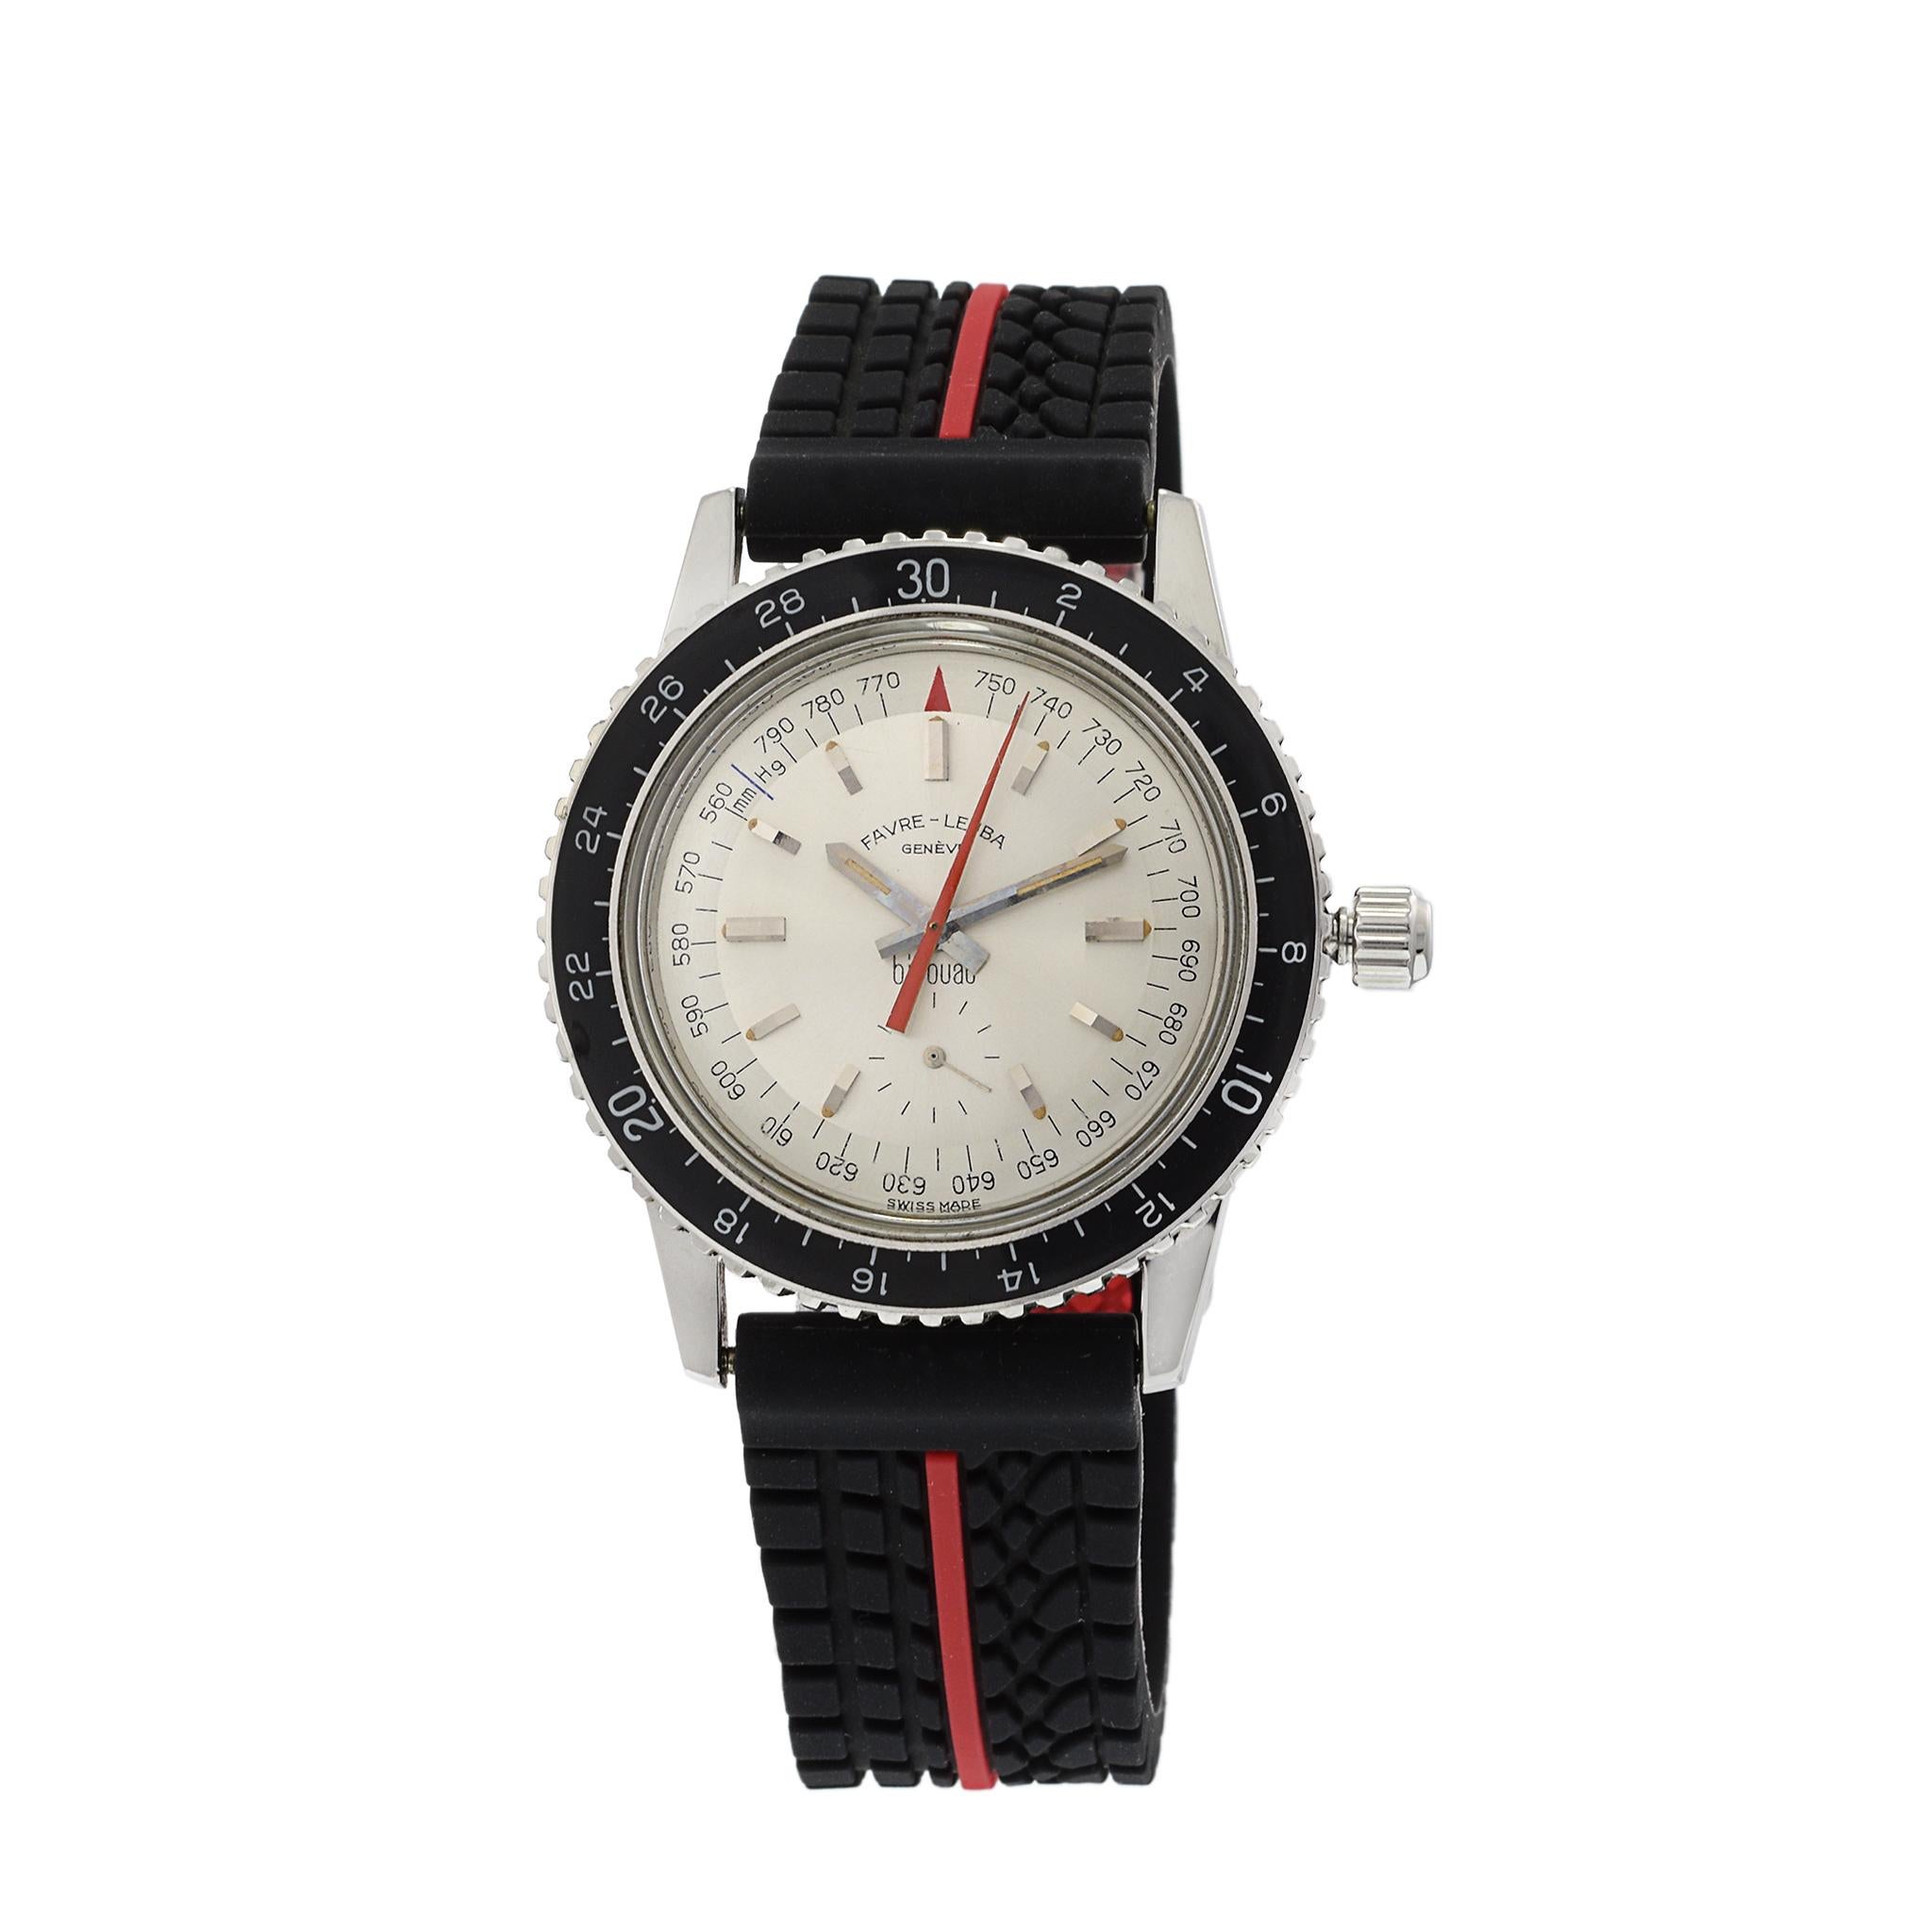 This is a Favre-Leuba Bivouac Altimeter Barometer reference 53213. This watch has a mint original silver dial, black bezel and a manual wind movement. These watches were used by the alpinists first climbing the north side of the Matterhorn and in